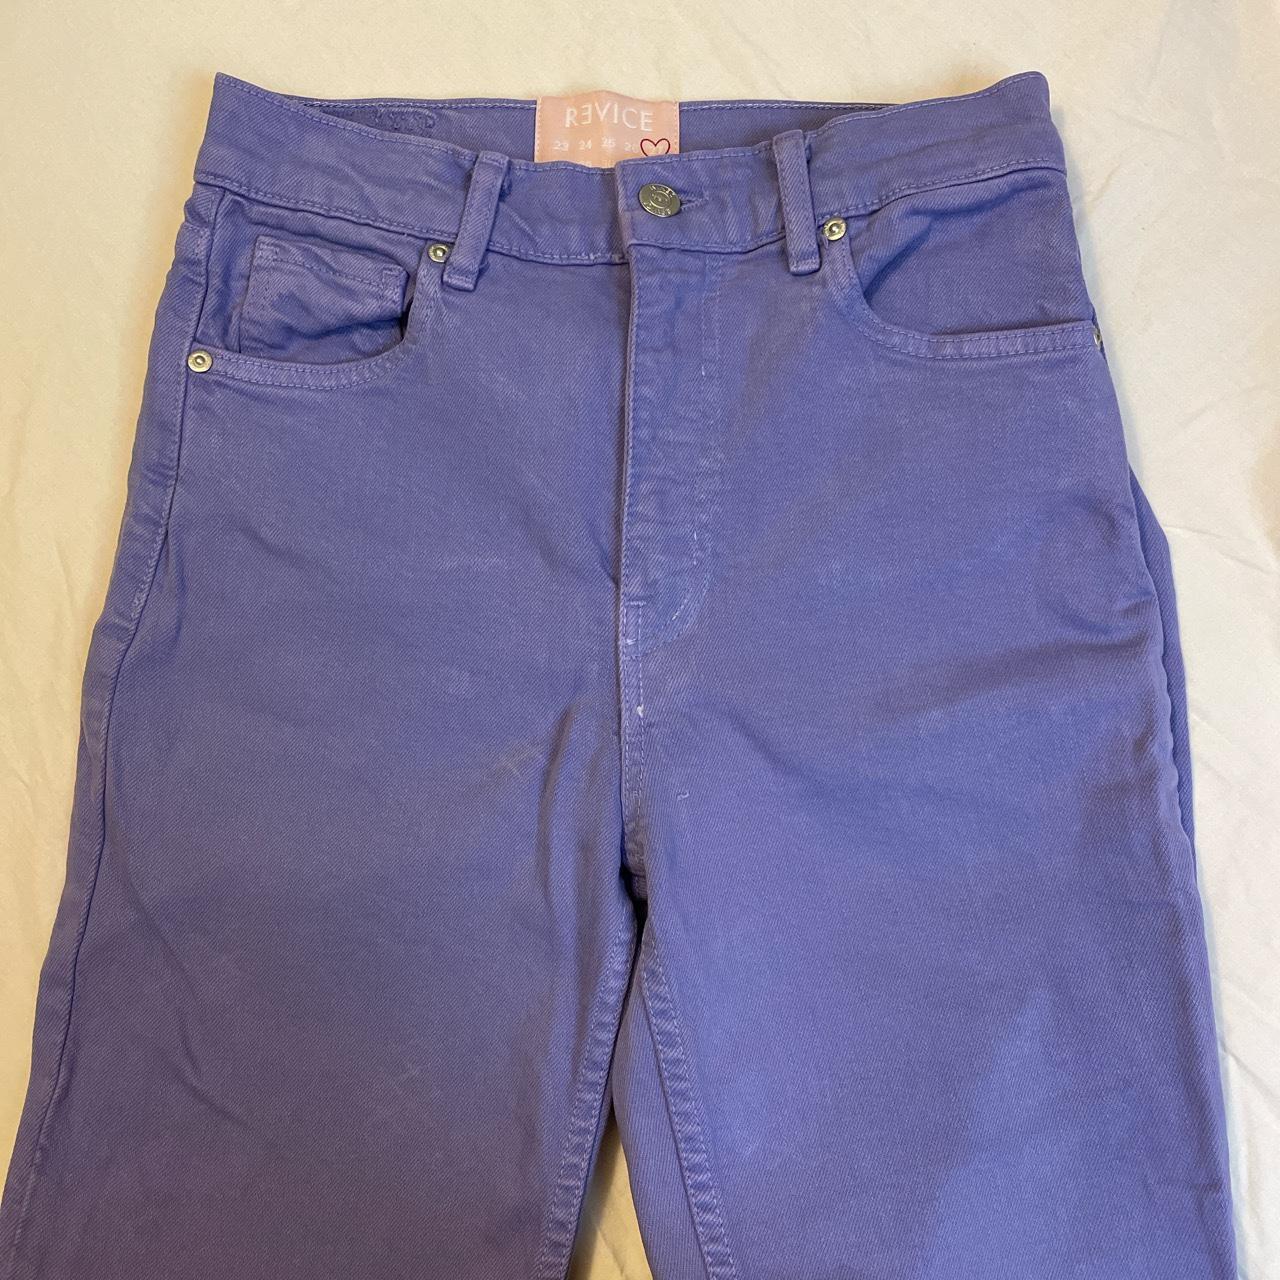 Revice Prince High-Rise Straight Leg Jeans in Purple... - Depop